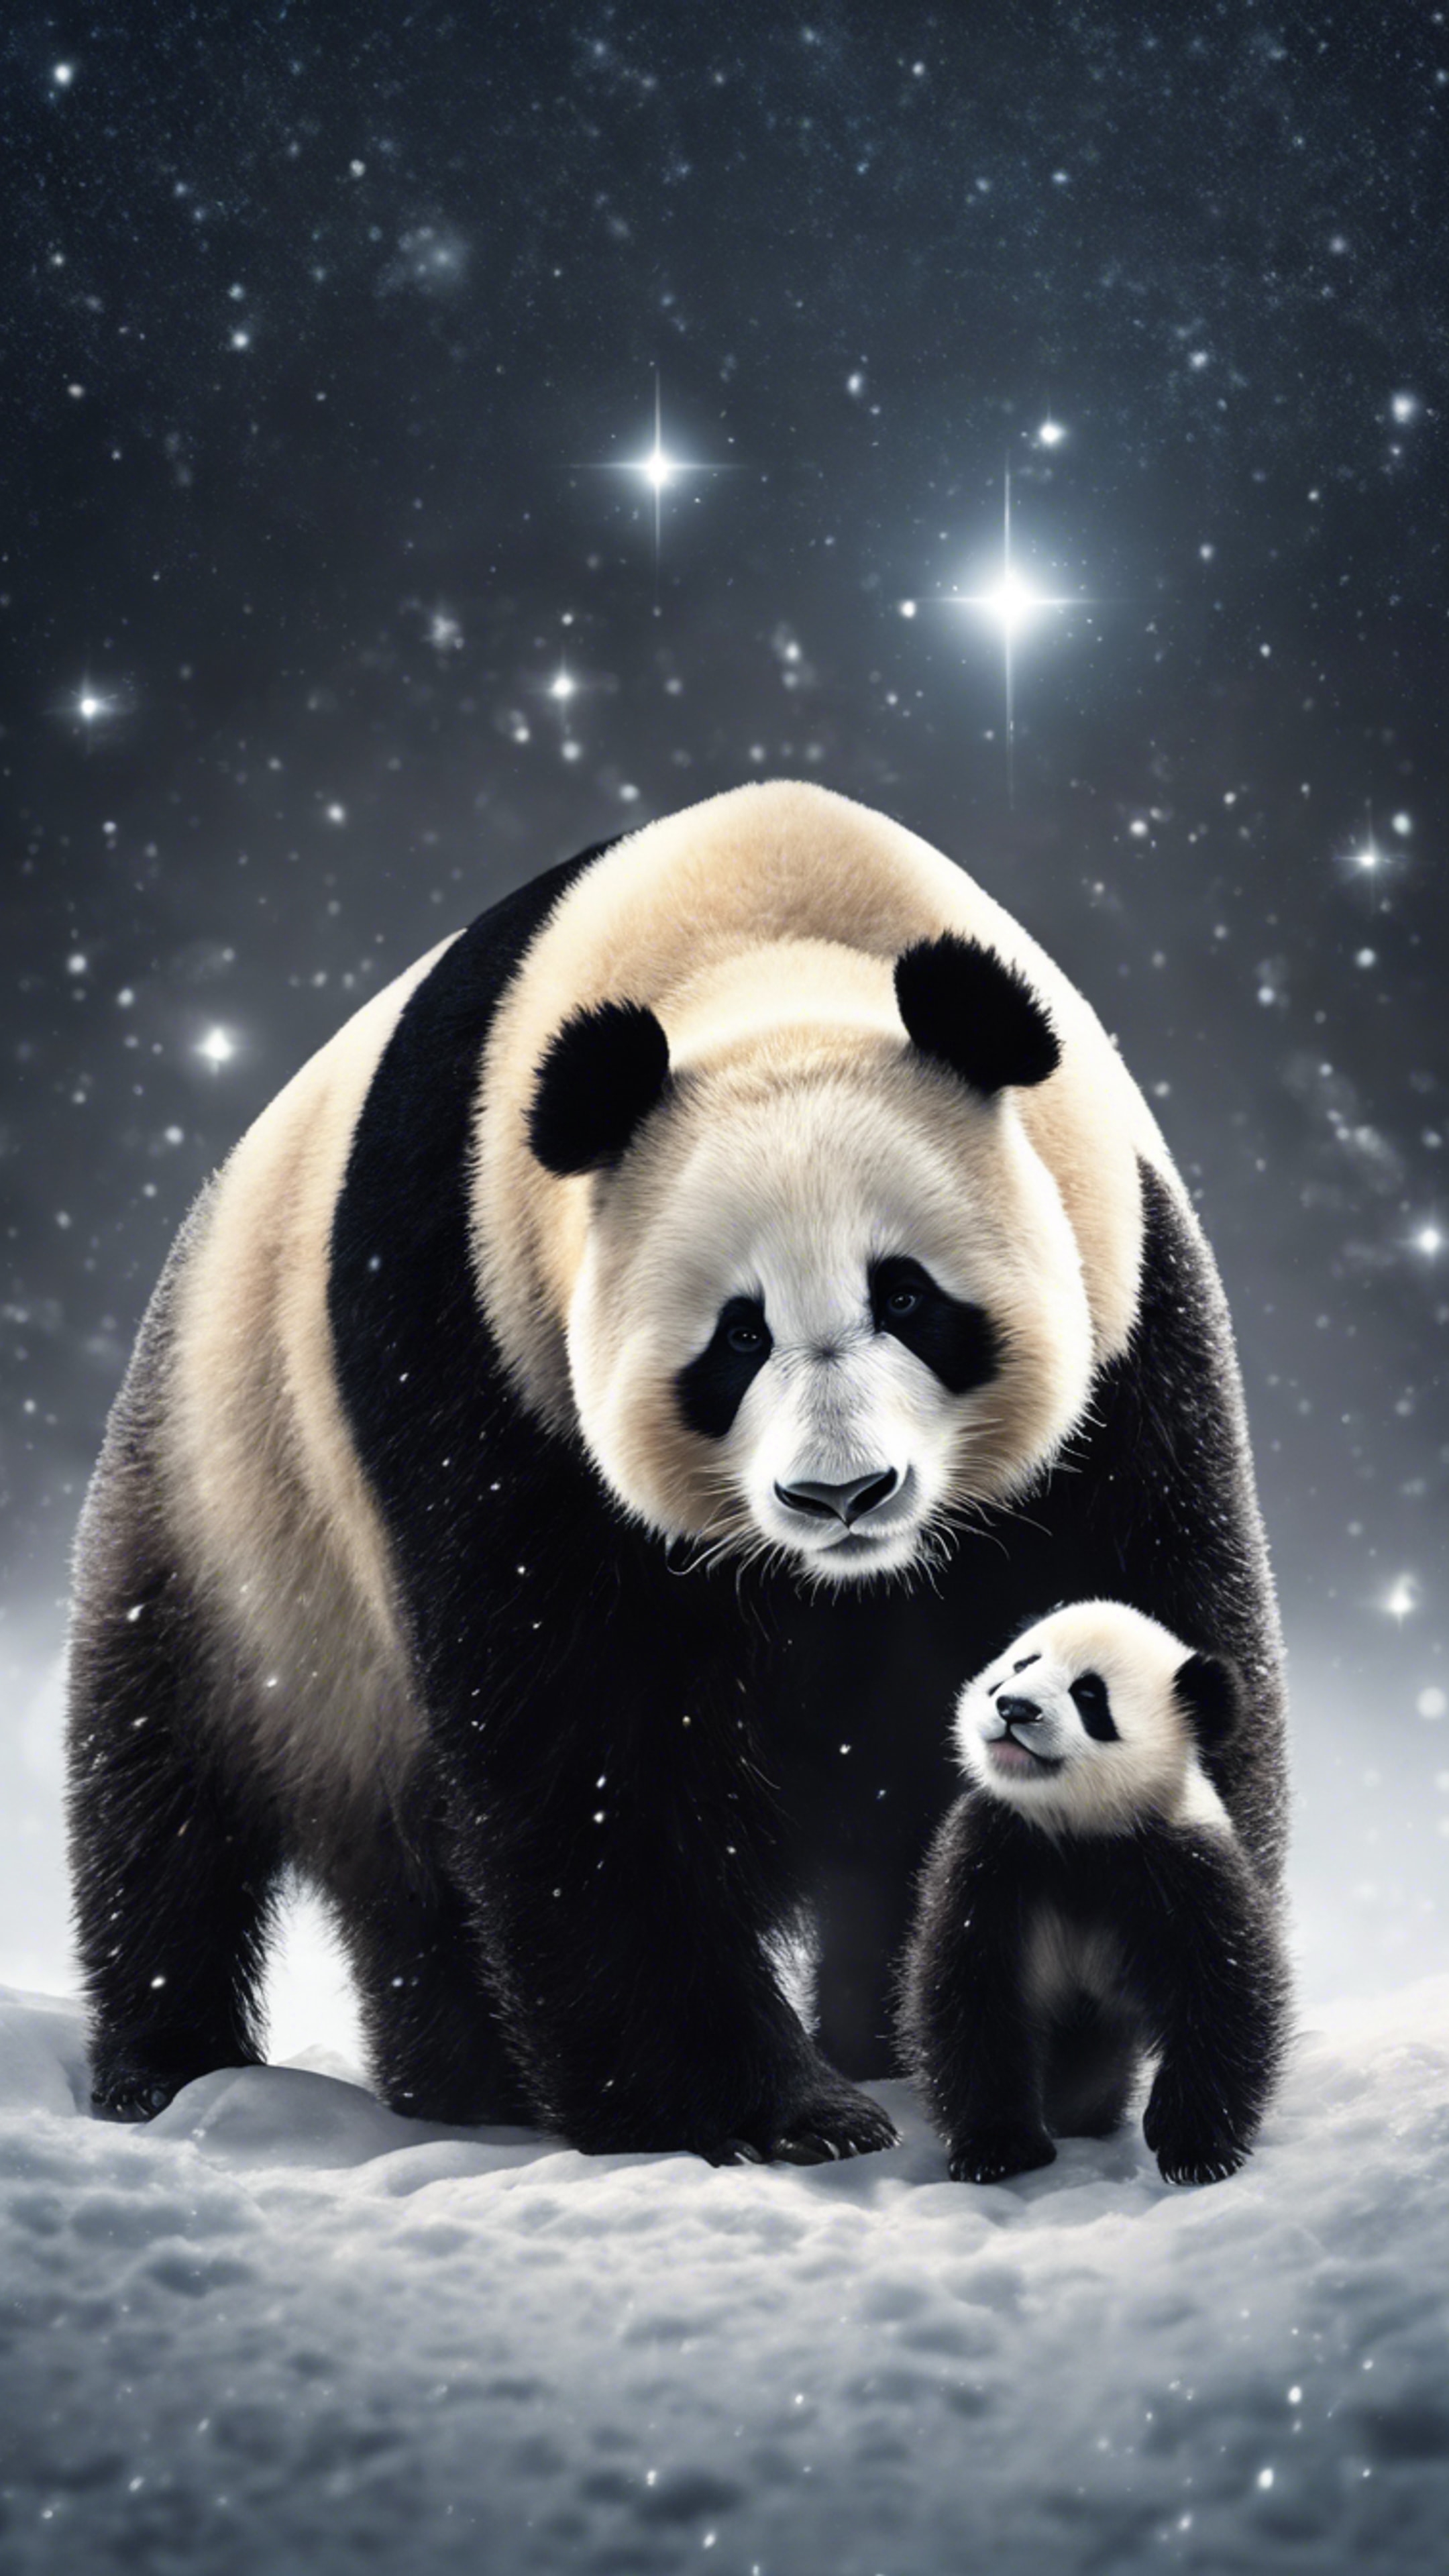 A mother panda with her cubs, peacefully taking a stroll on a silent, snowy night under a blanket of stars. Wallpaper[875b5ef660eb48ddb691]